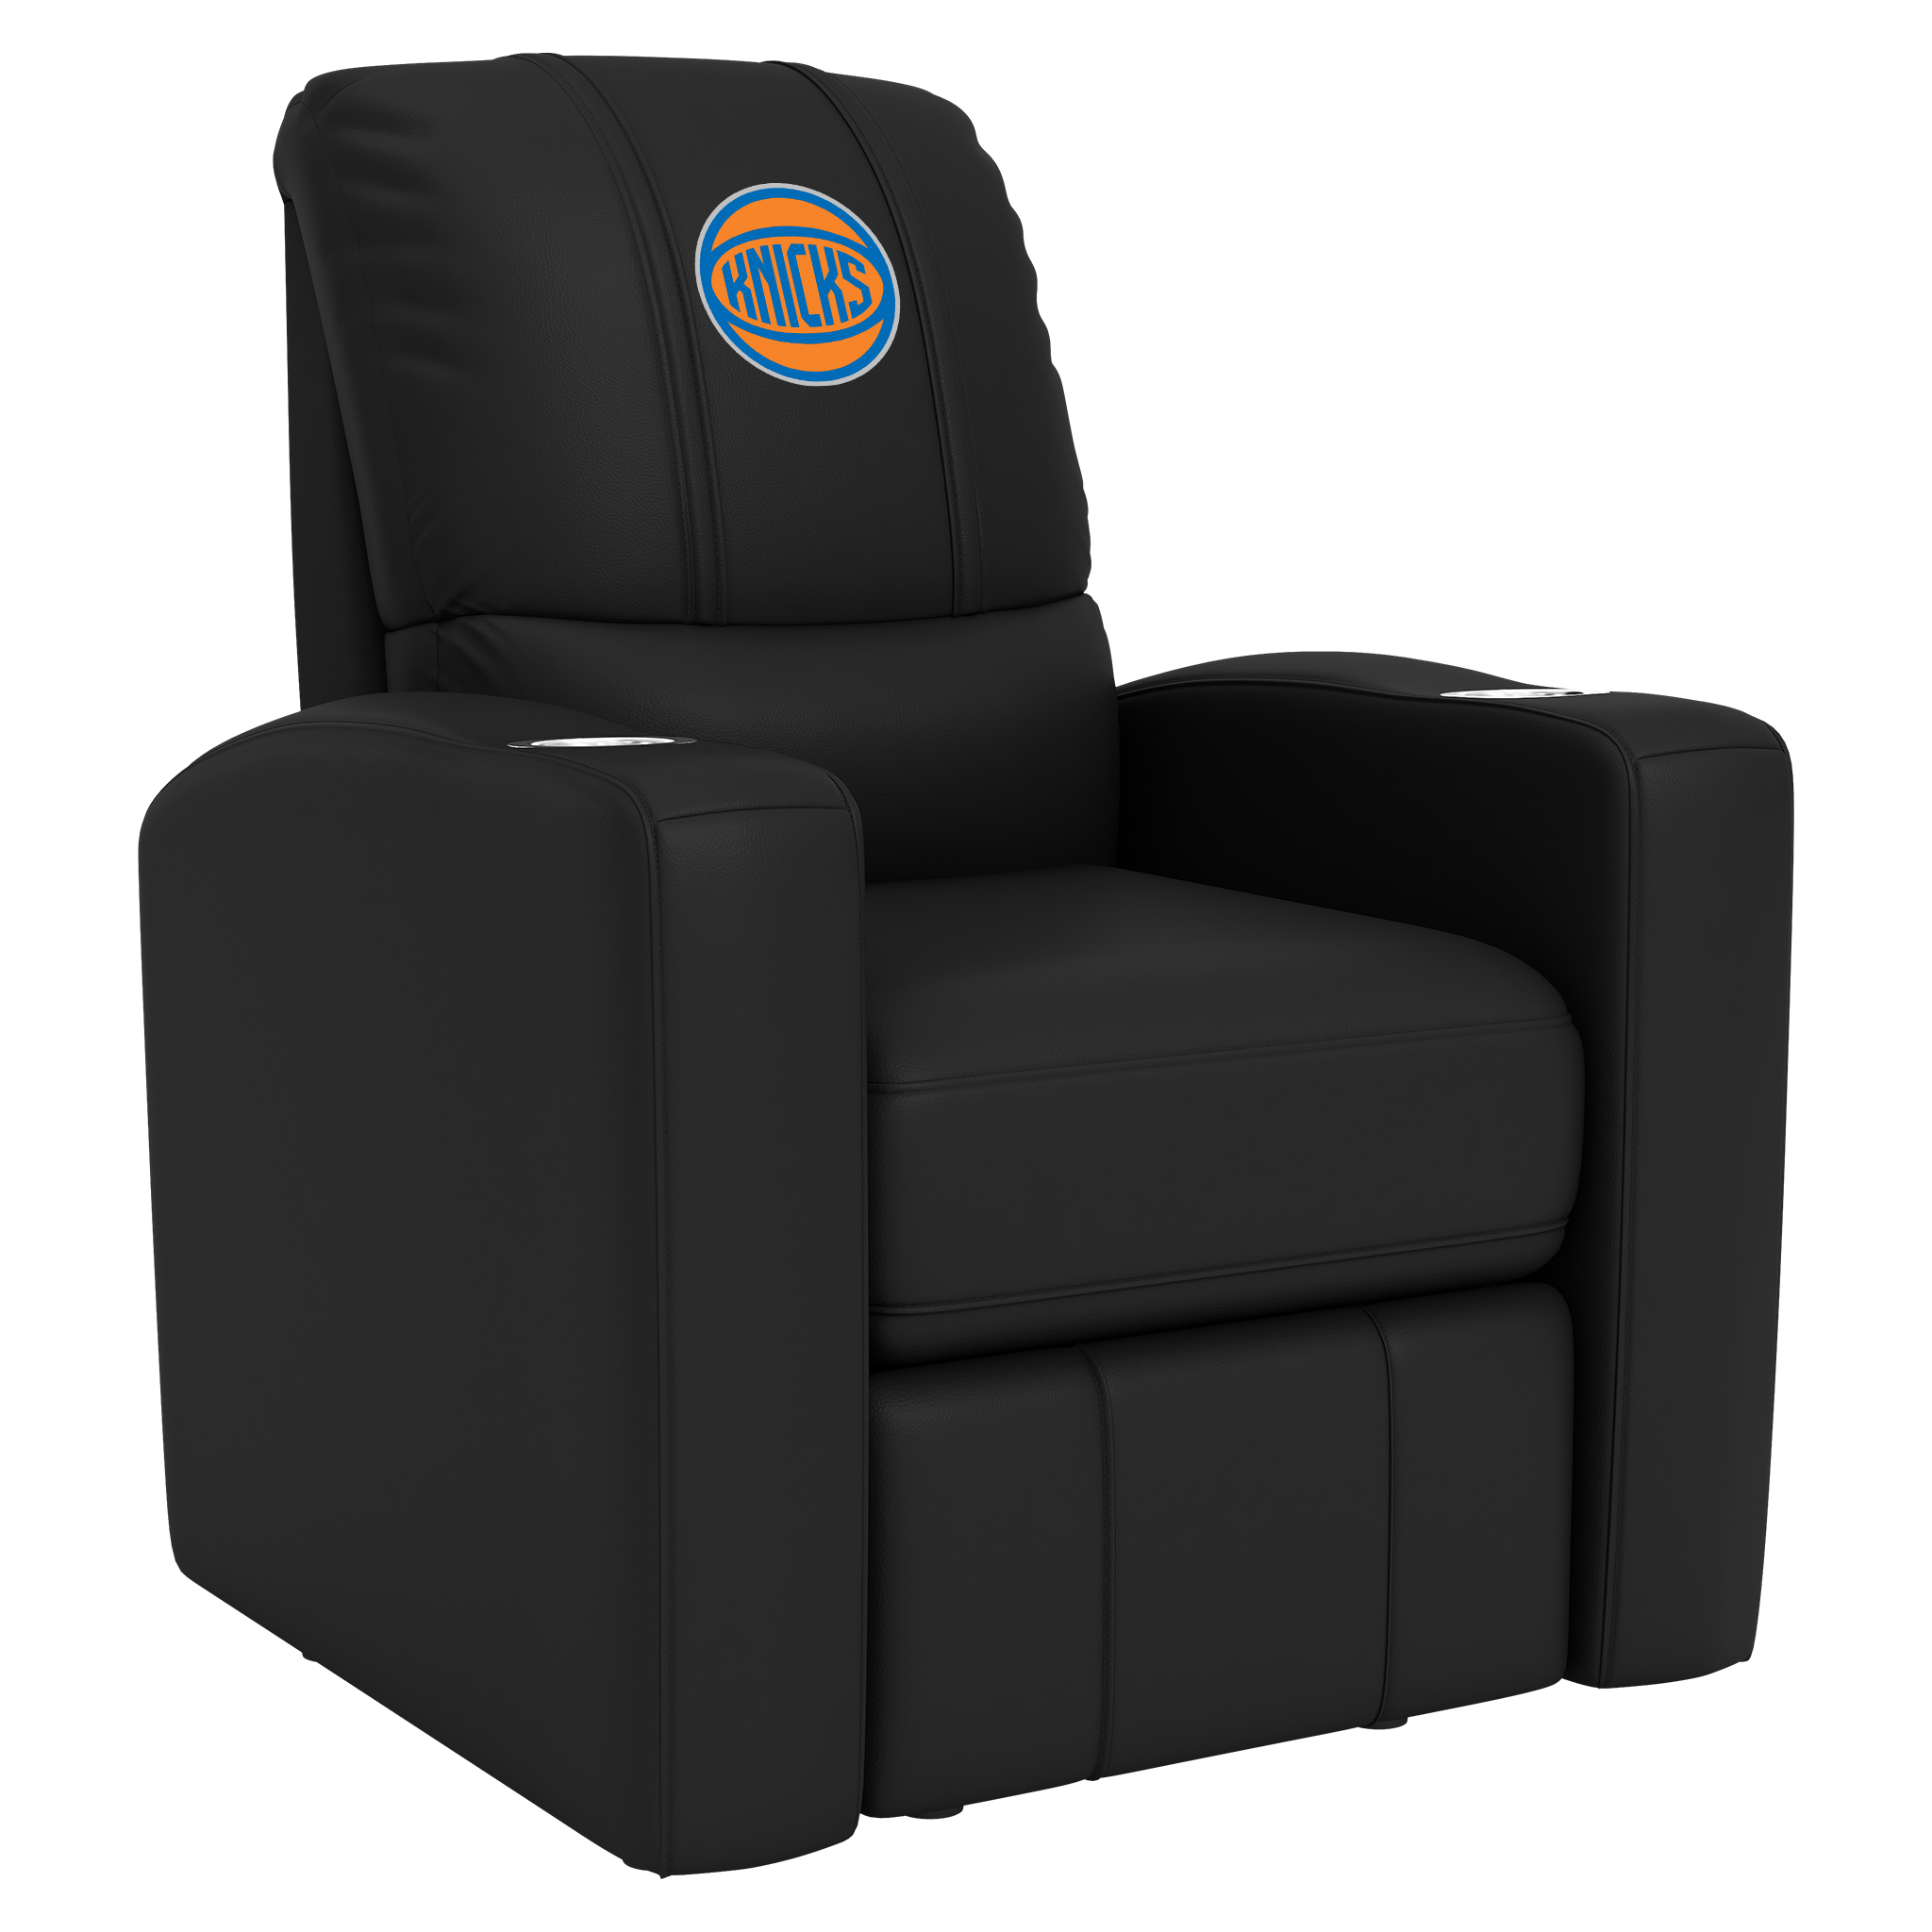 New York Knicks Stealth Recliner with New York Knicks Secondary